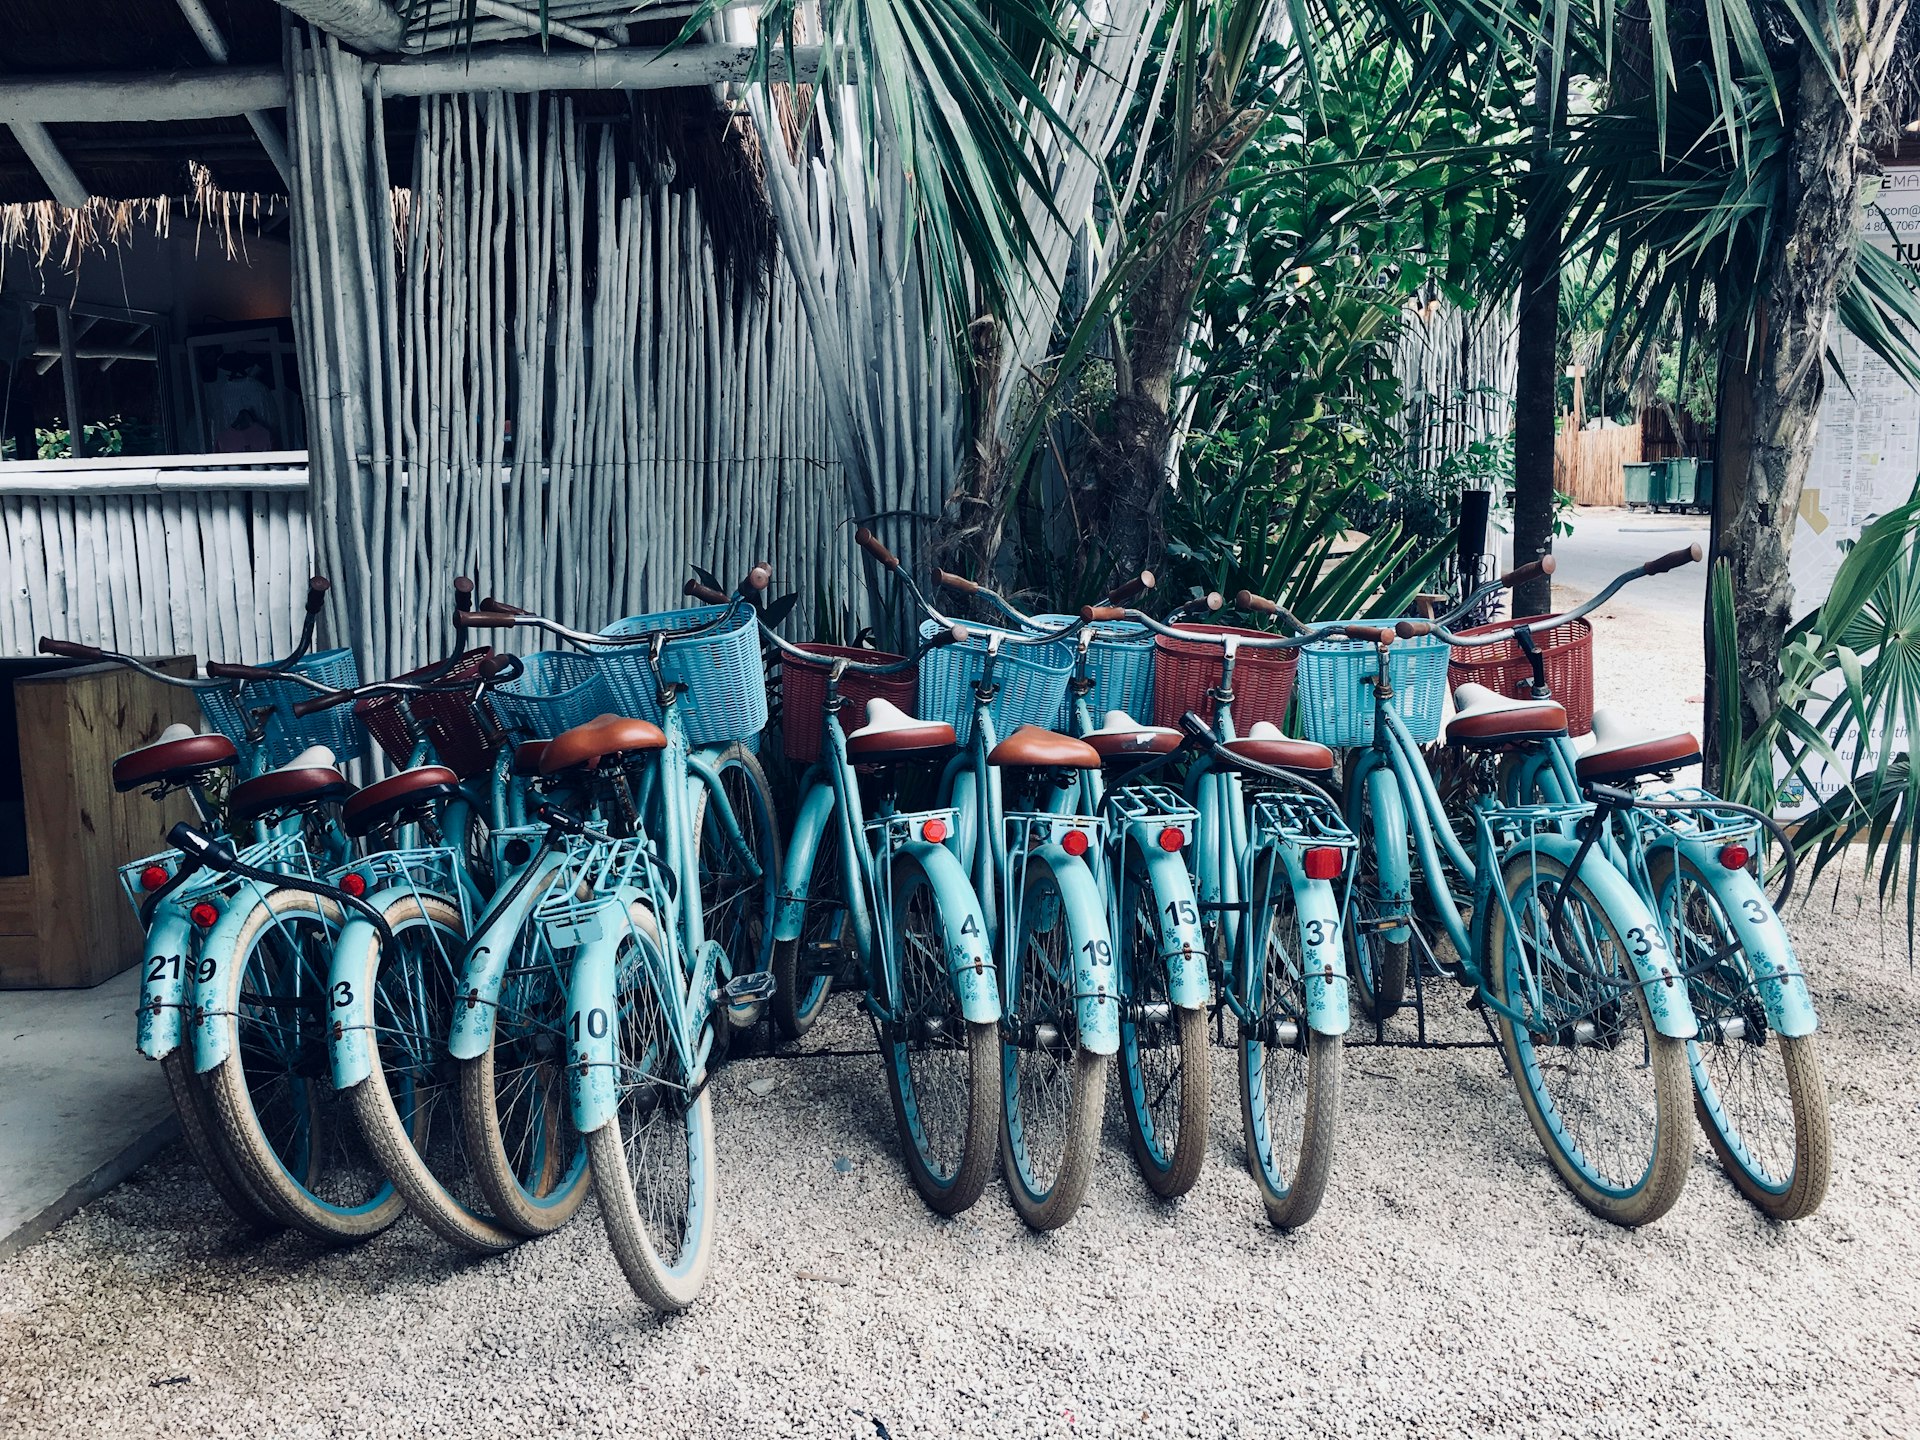 A row of turquoise bicycles parked under palm trees